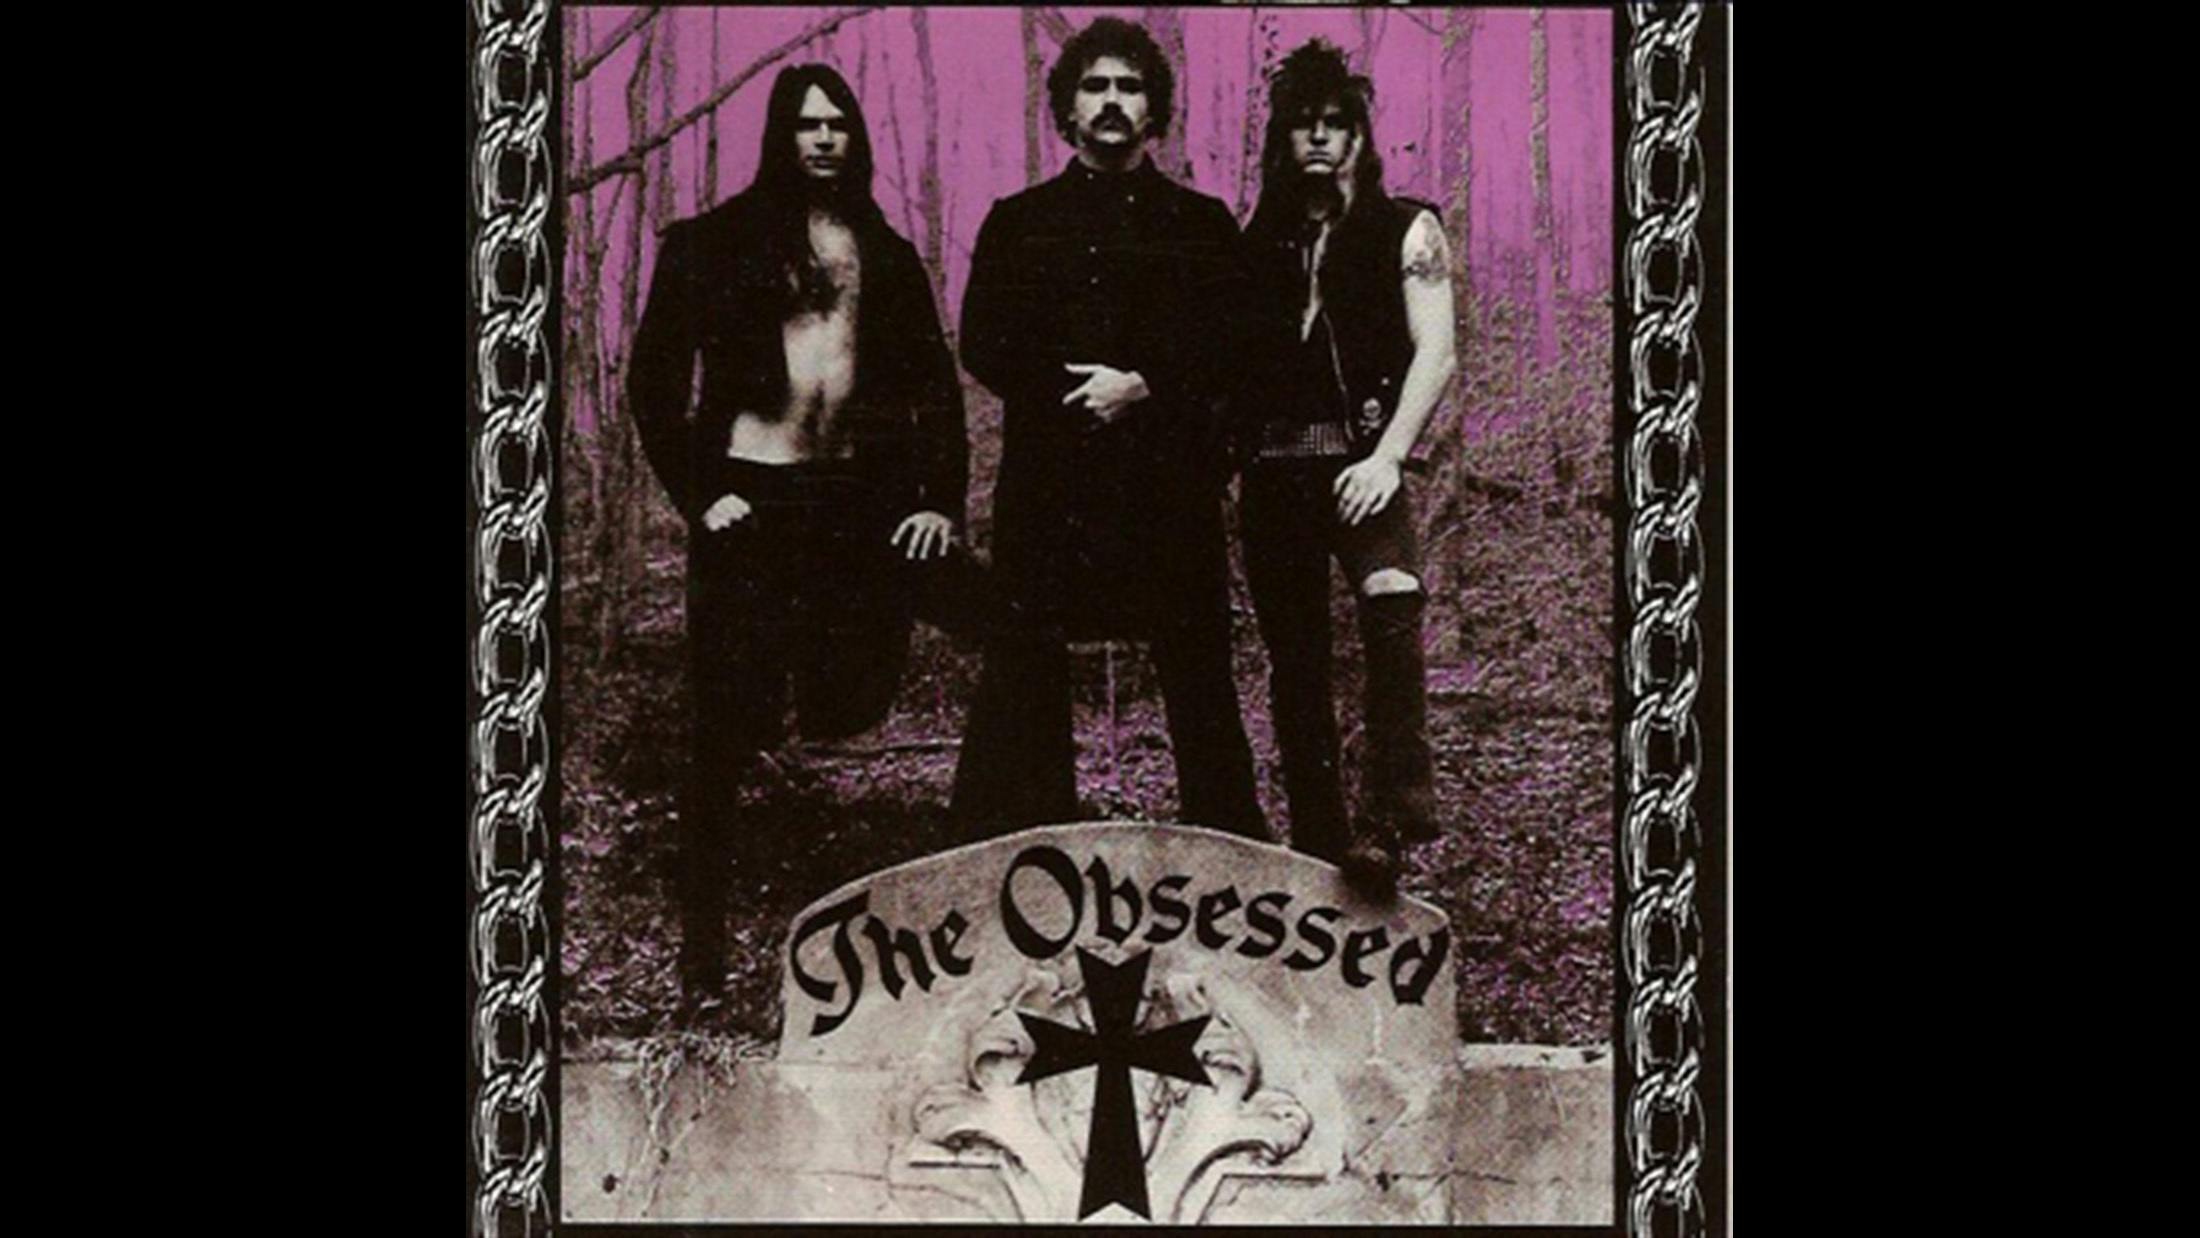 One of approximately 978 bands featuring Scott ‘Wino’ Weinrich, The Obsessed saw the man dealing in doom riffs that sound like they’ve come straight from a motorcycle repair shop. A sort-of doom answer to Lemmy, Wino is a lifer who is also an absolute motherfucker, and also so hard/scary in the early days that he found himself only receiving a small amount of shit from punks other longhairs did. This all bleeds into his music, and The Obsessed’s debut – recorded in 1985 before he joined Saint Vitus, but not released for five years – is packed with the man’s trademark weighty riffs, take-no-shit attitude and bluesman’s soul.